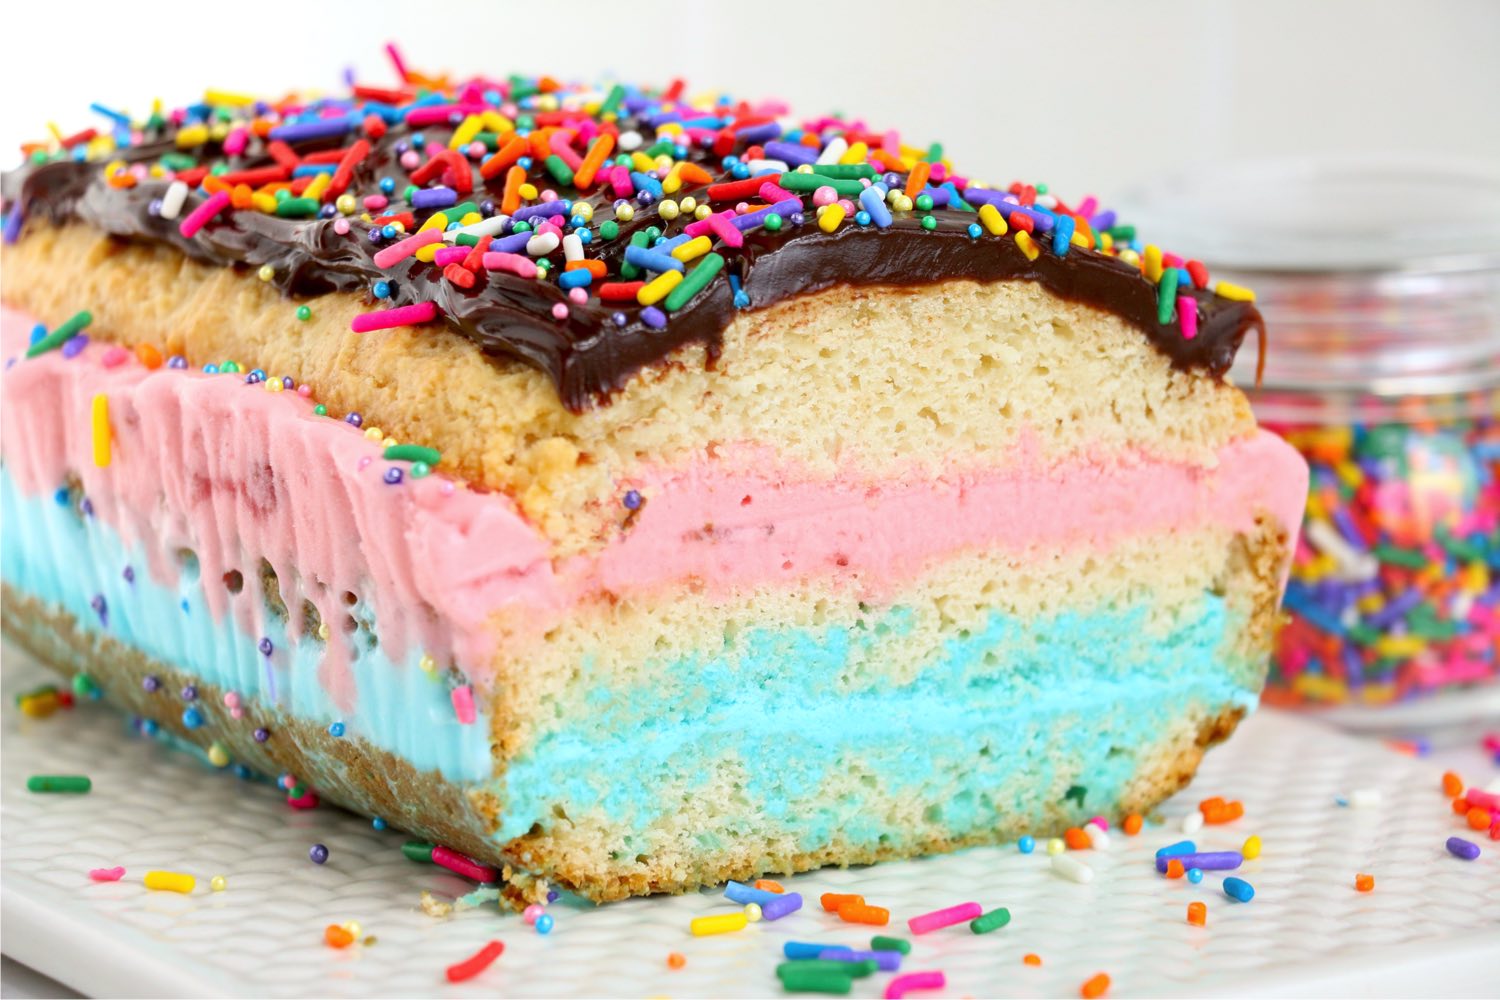 inside view of a layer cake